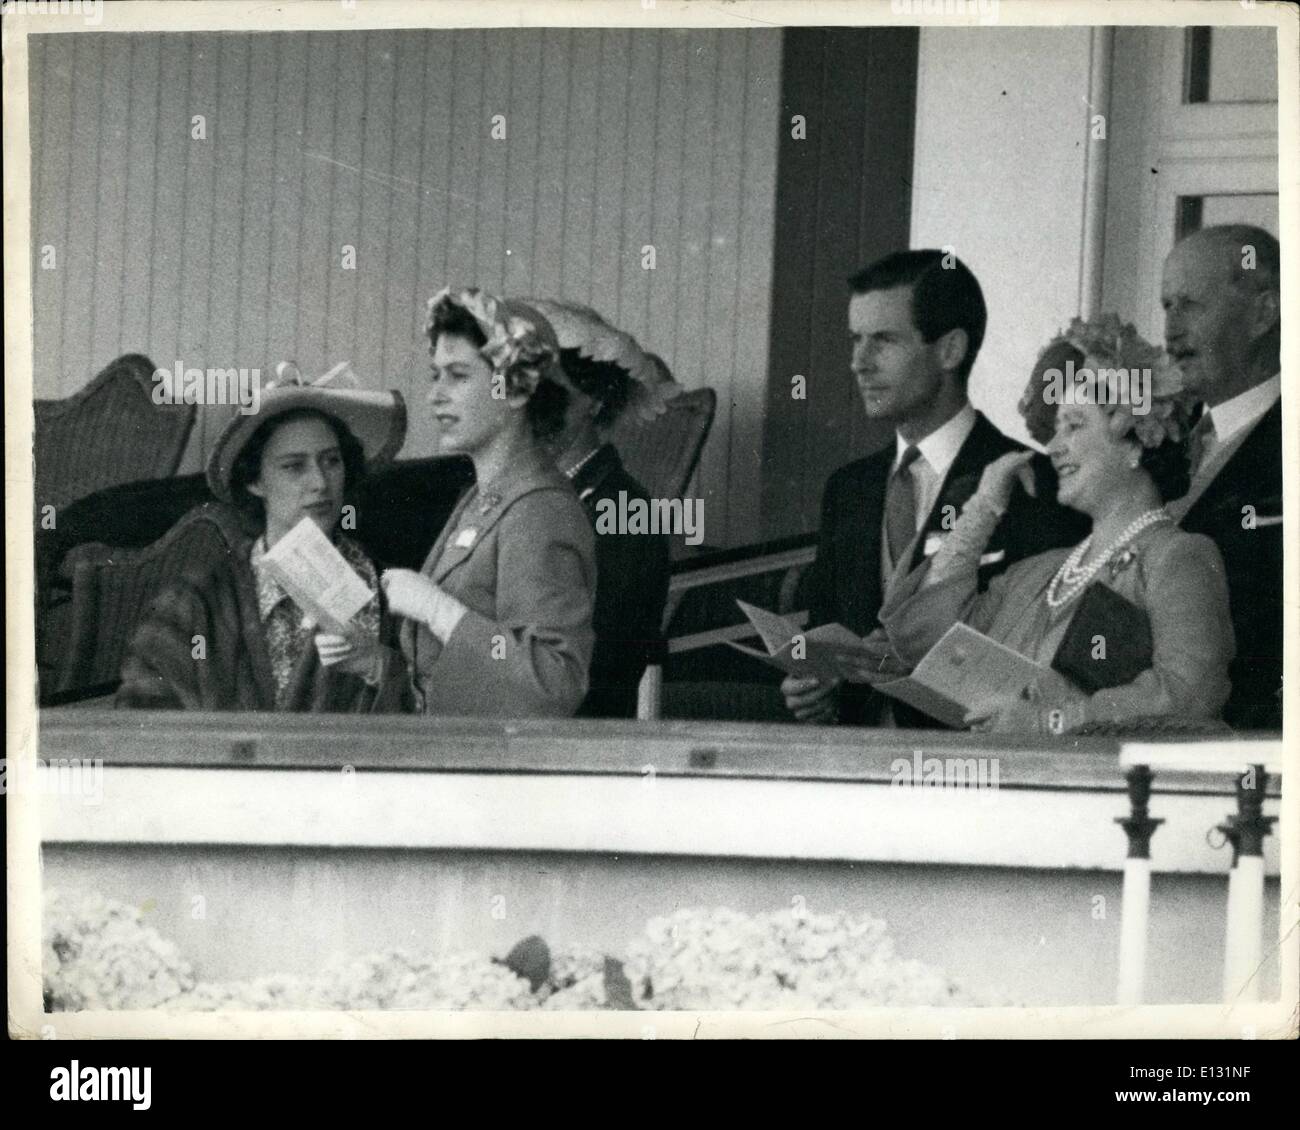 Feb. 26, 2012 - Princess Margaret and Group Captain Peter Townsend - At Ascot.: Photo shows Princess Margaret on left - The Queen (Then Princess Elizabeth); Group captain Peter Townsend - friend of Princess, and who the Princess Margaret, and who the Princess is said to wish to marry) and the Queen Mother - seen in the Royal Box at Ascot (13-6-51) Stock Photo